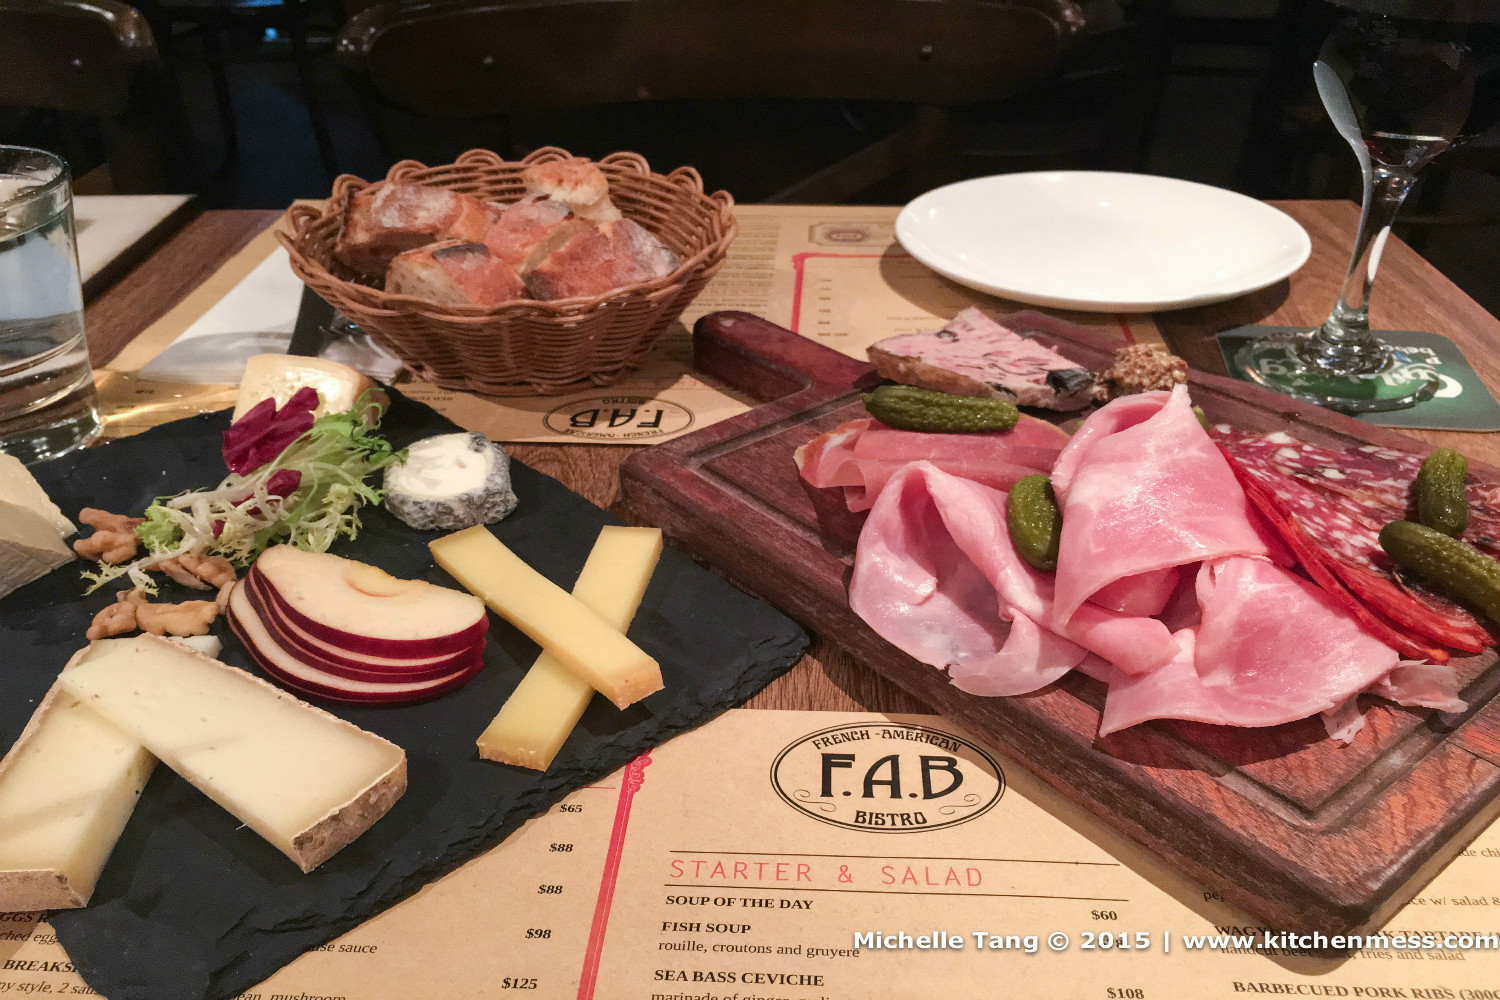 mixed platter of cheese and charcuterie